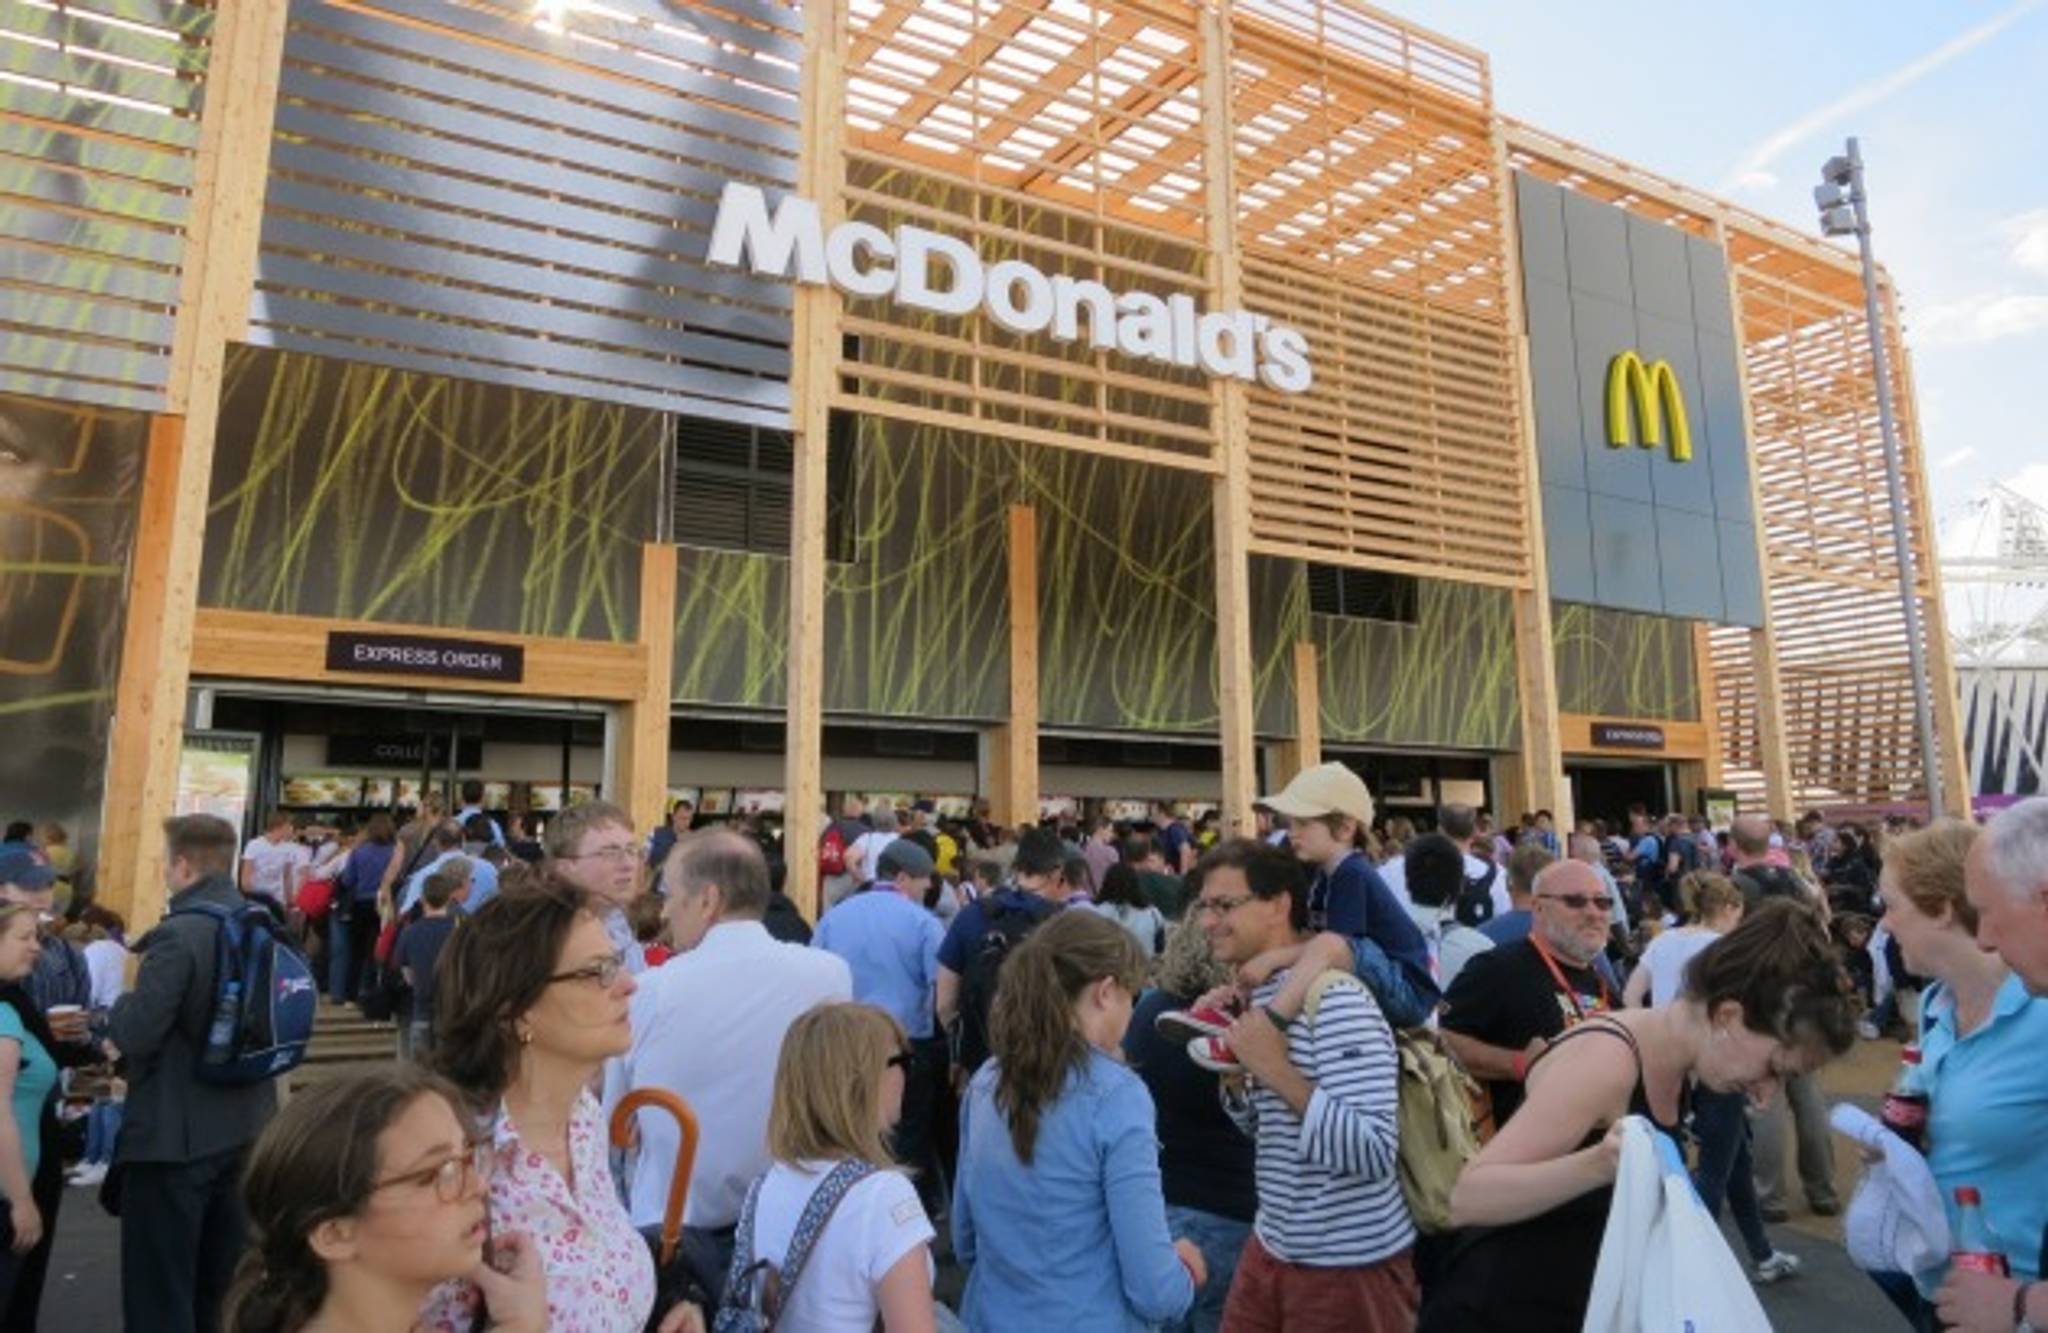 Cut the queue: why millions are going mobile at McDonald's